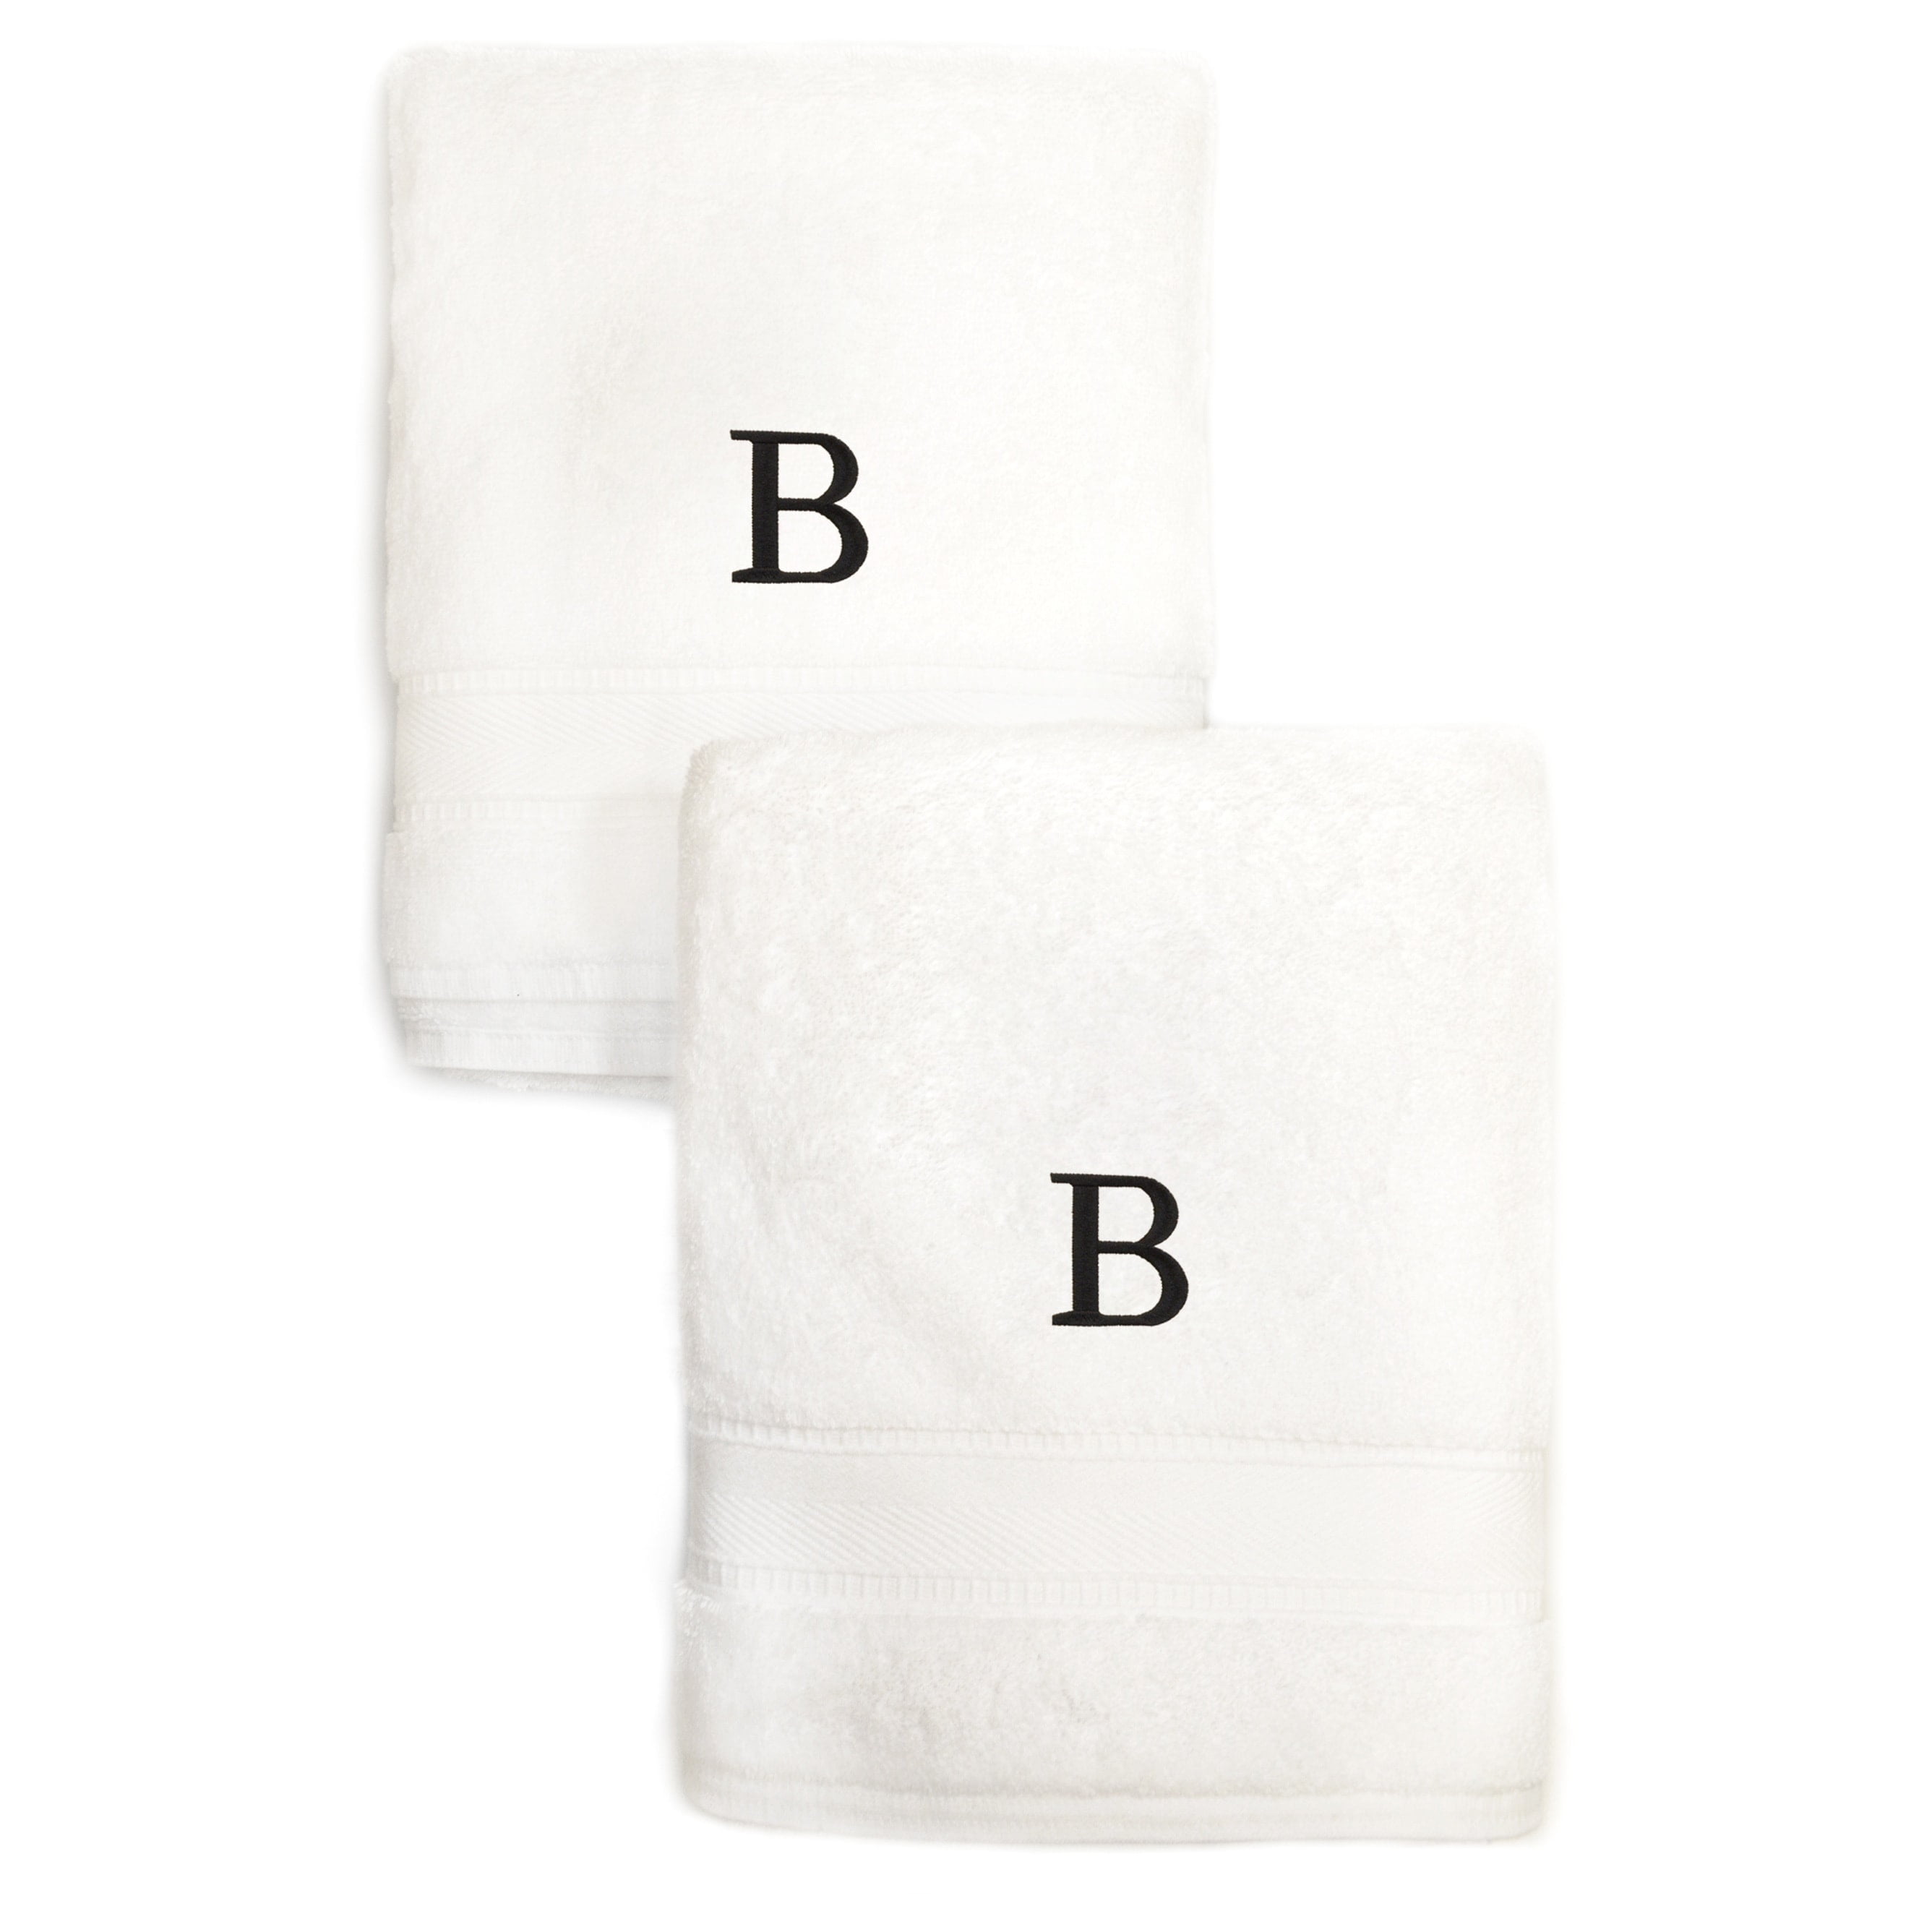 Authentic Hotel and Spa 2-piece White Turkish Cotton Hand Towels with Black  Monogrammed Initial White/E